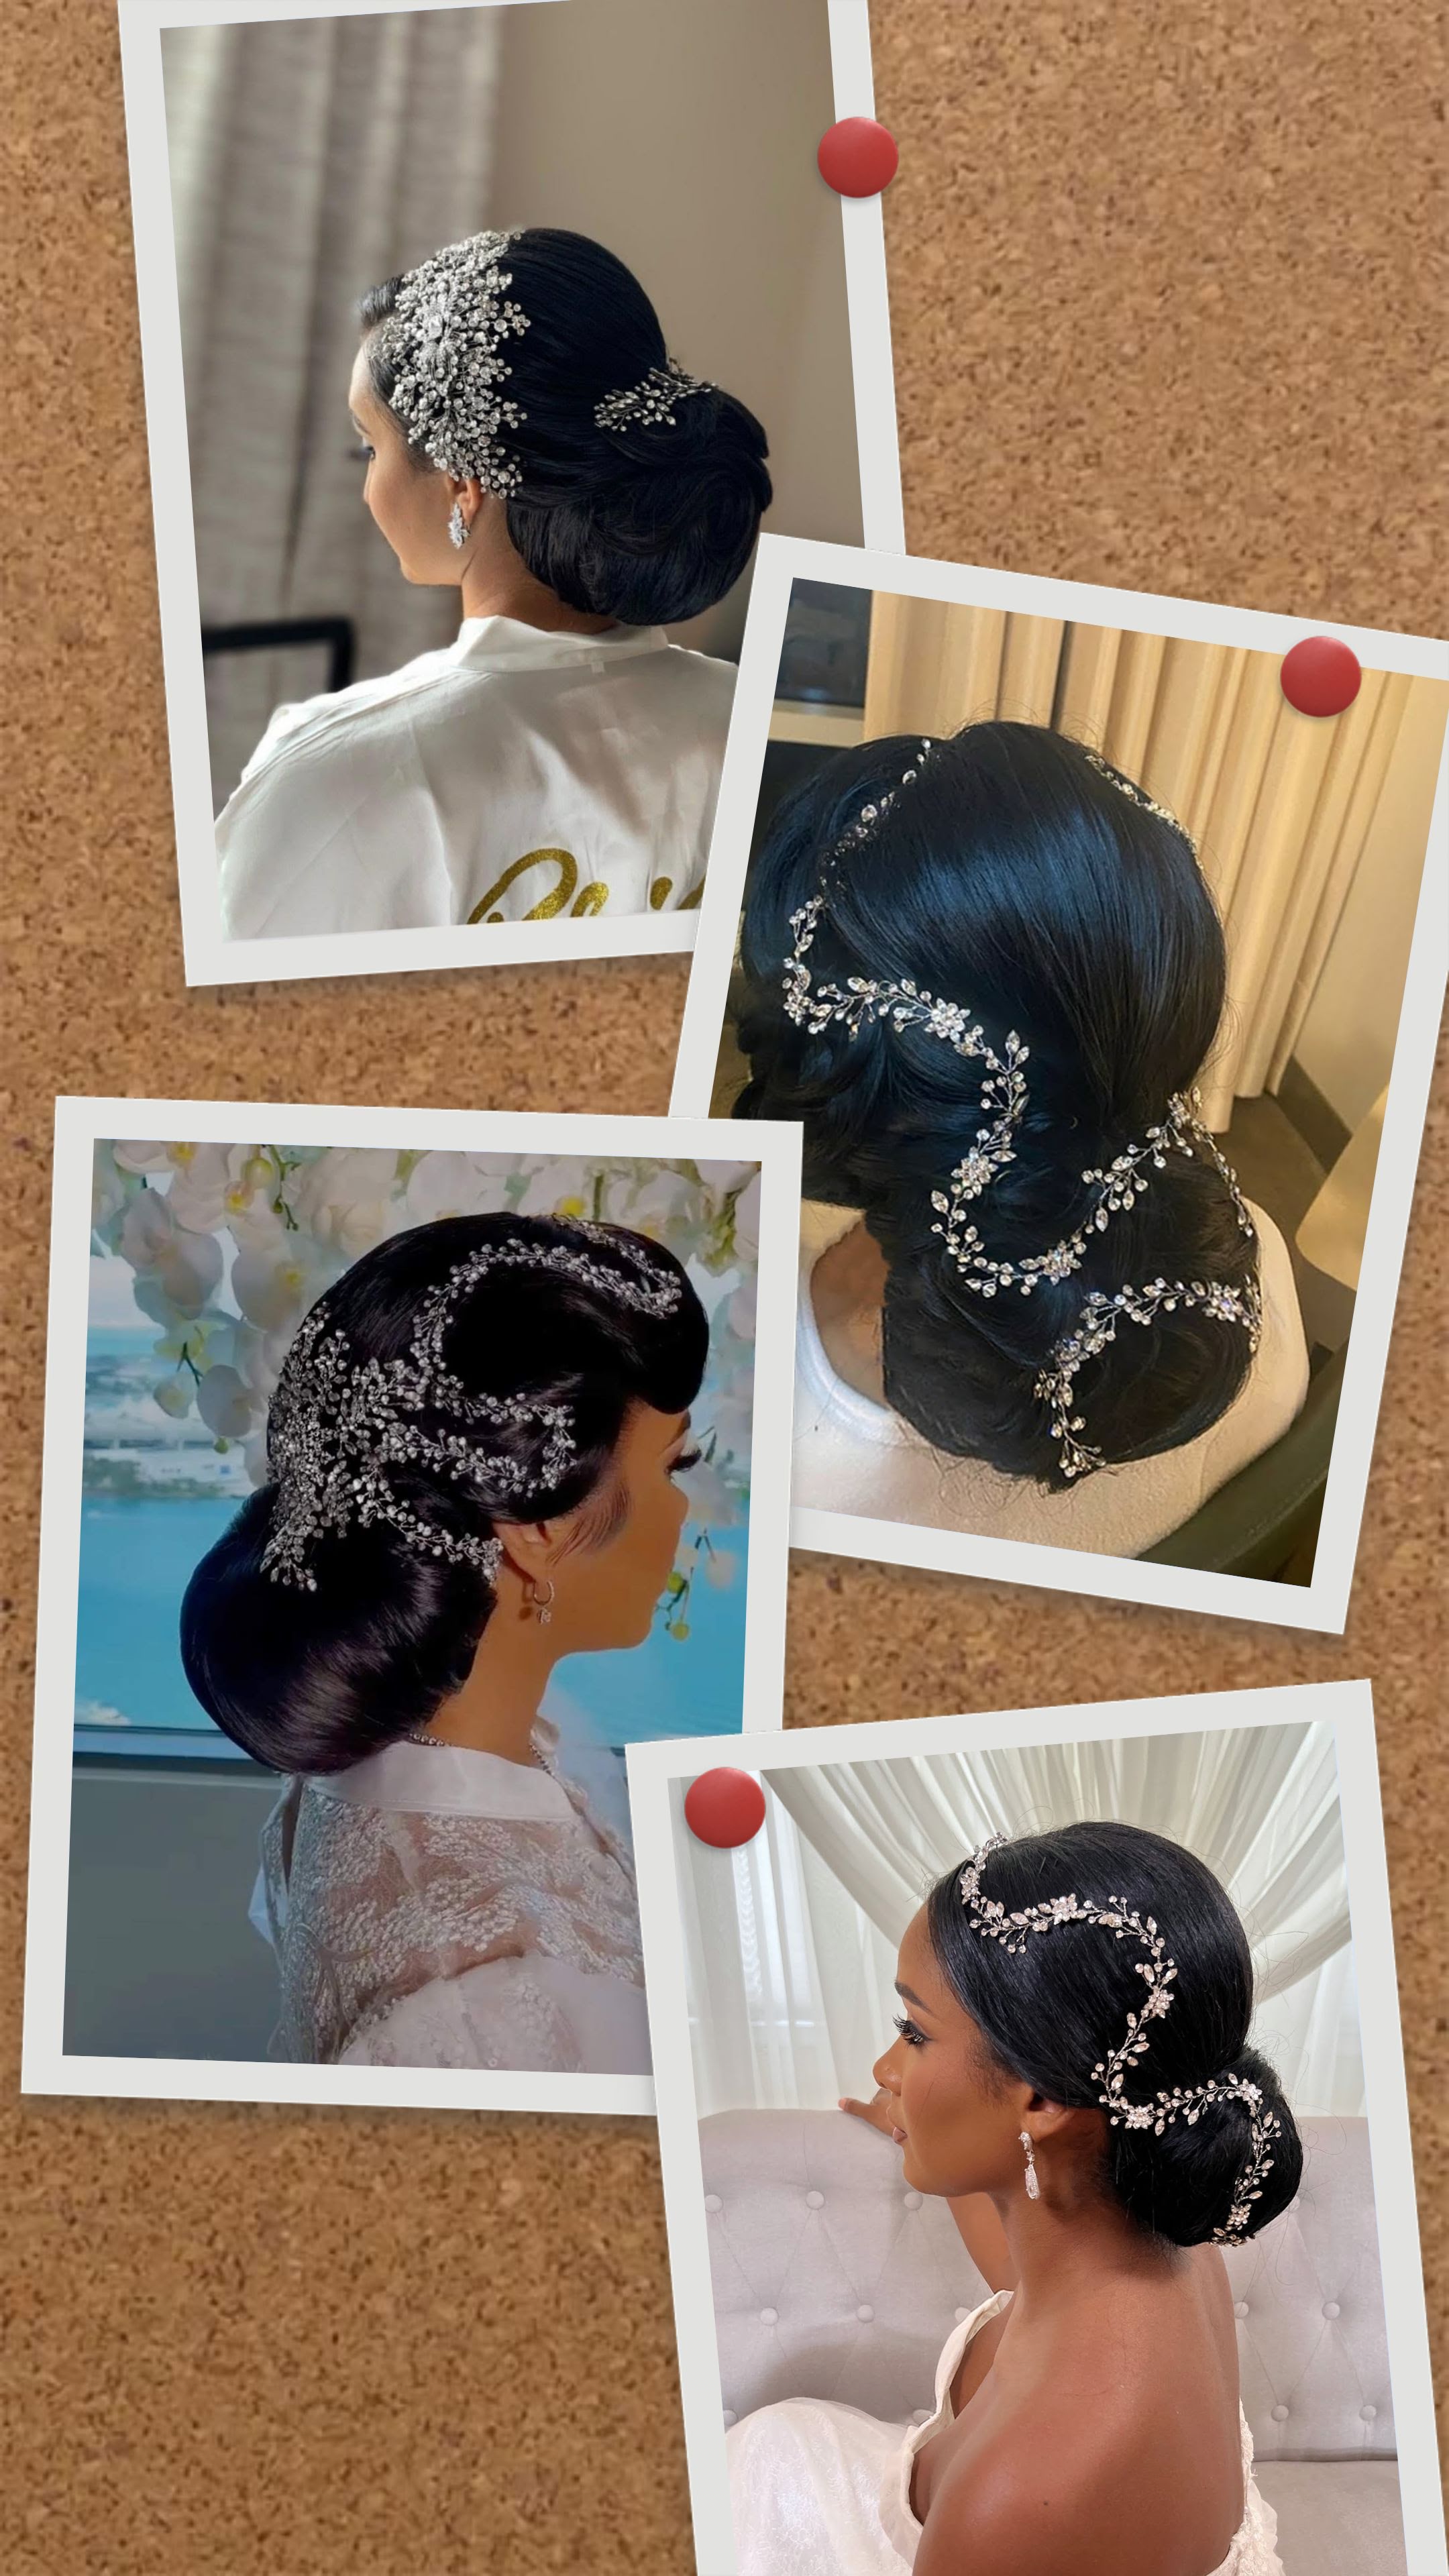 Bridal hair accessory ideas with a collage of images of wedding hairstyles with flexible wedding hair vines covered in Swarovski crystals